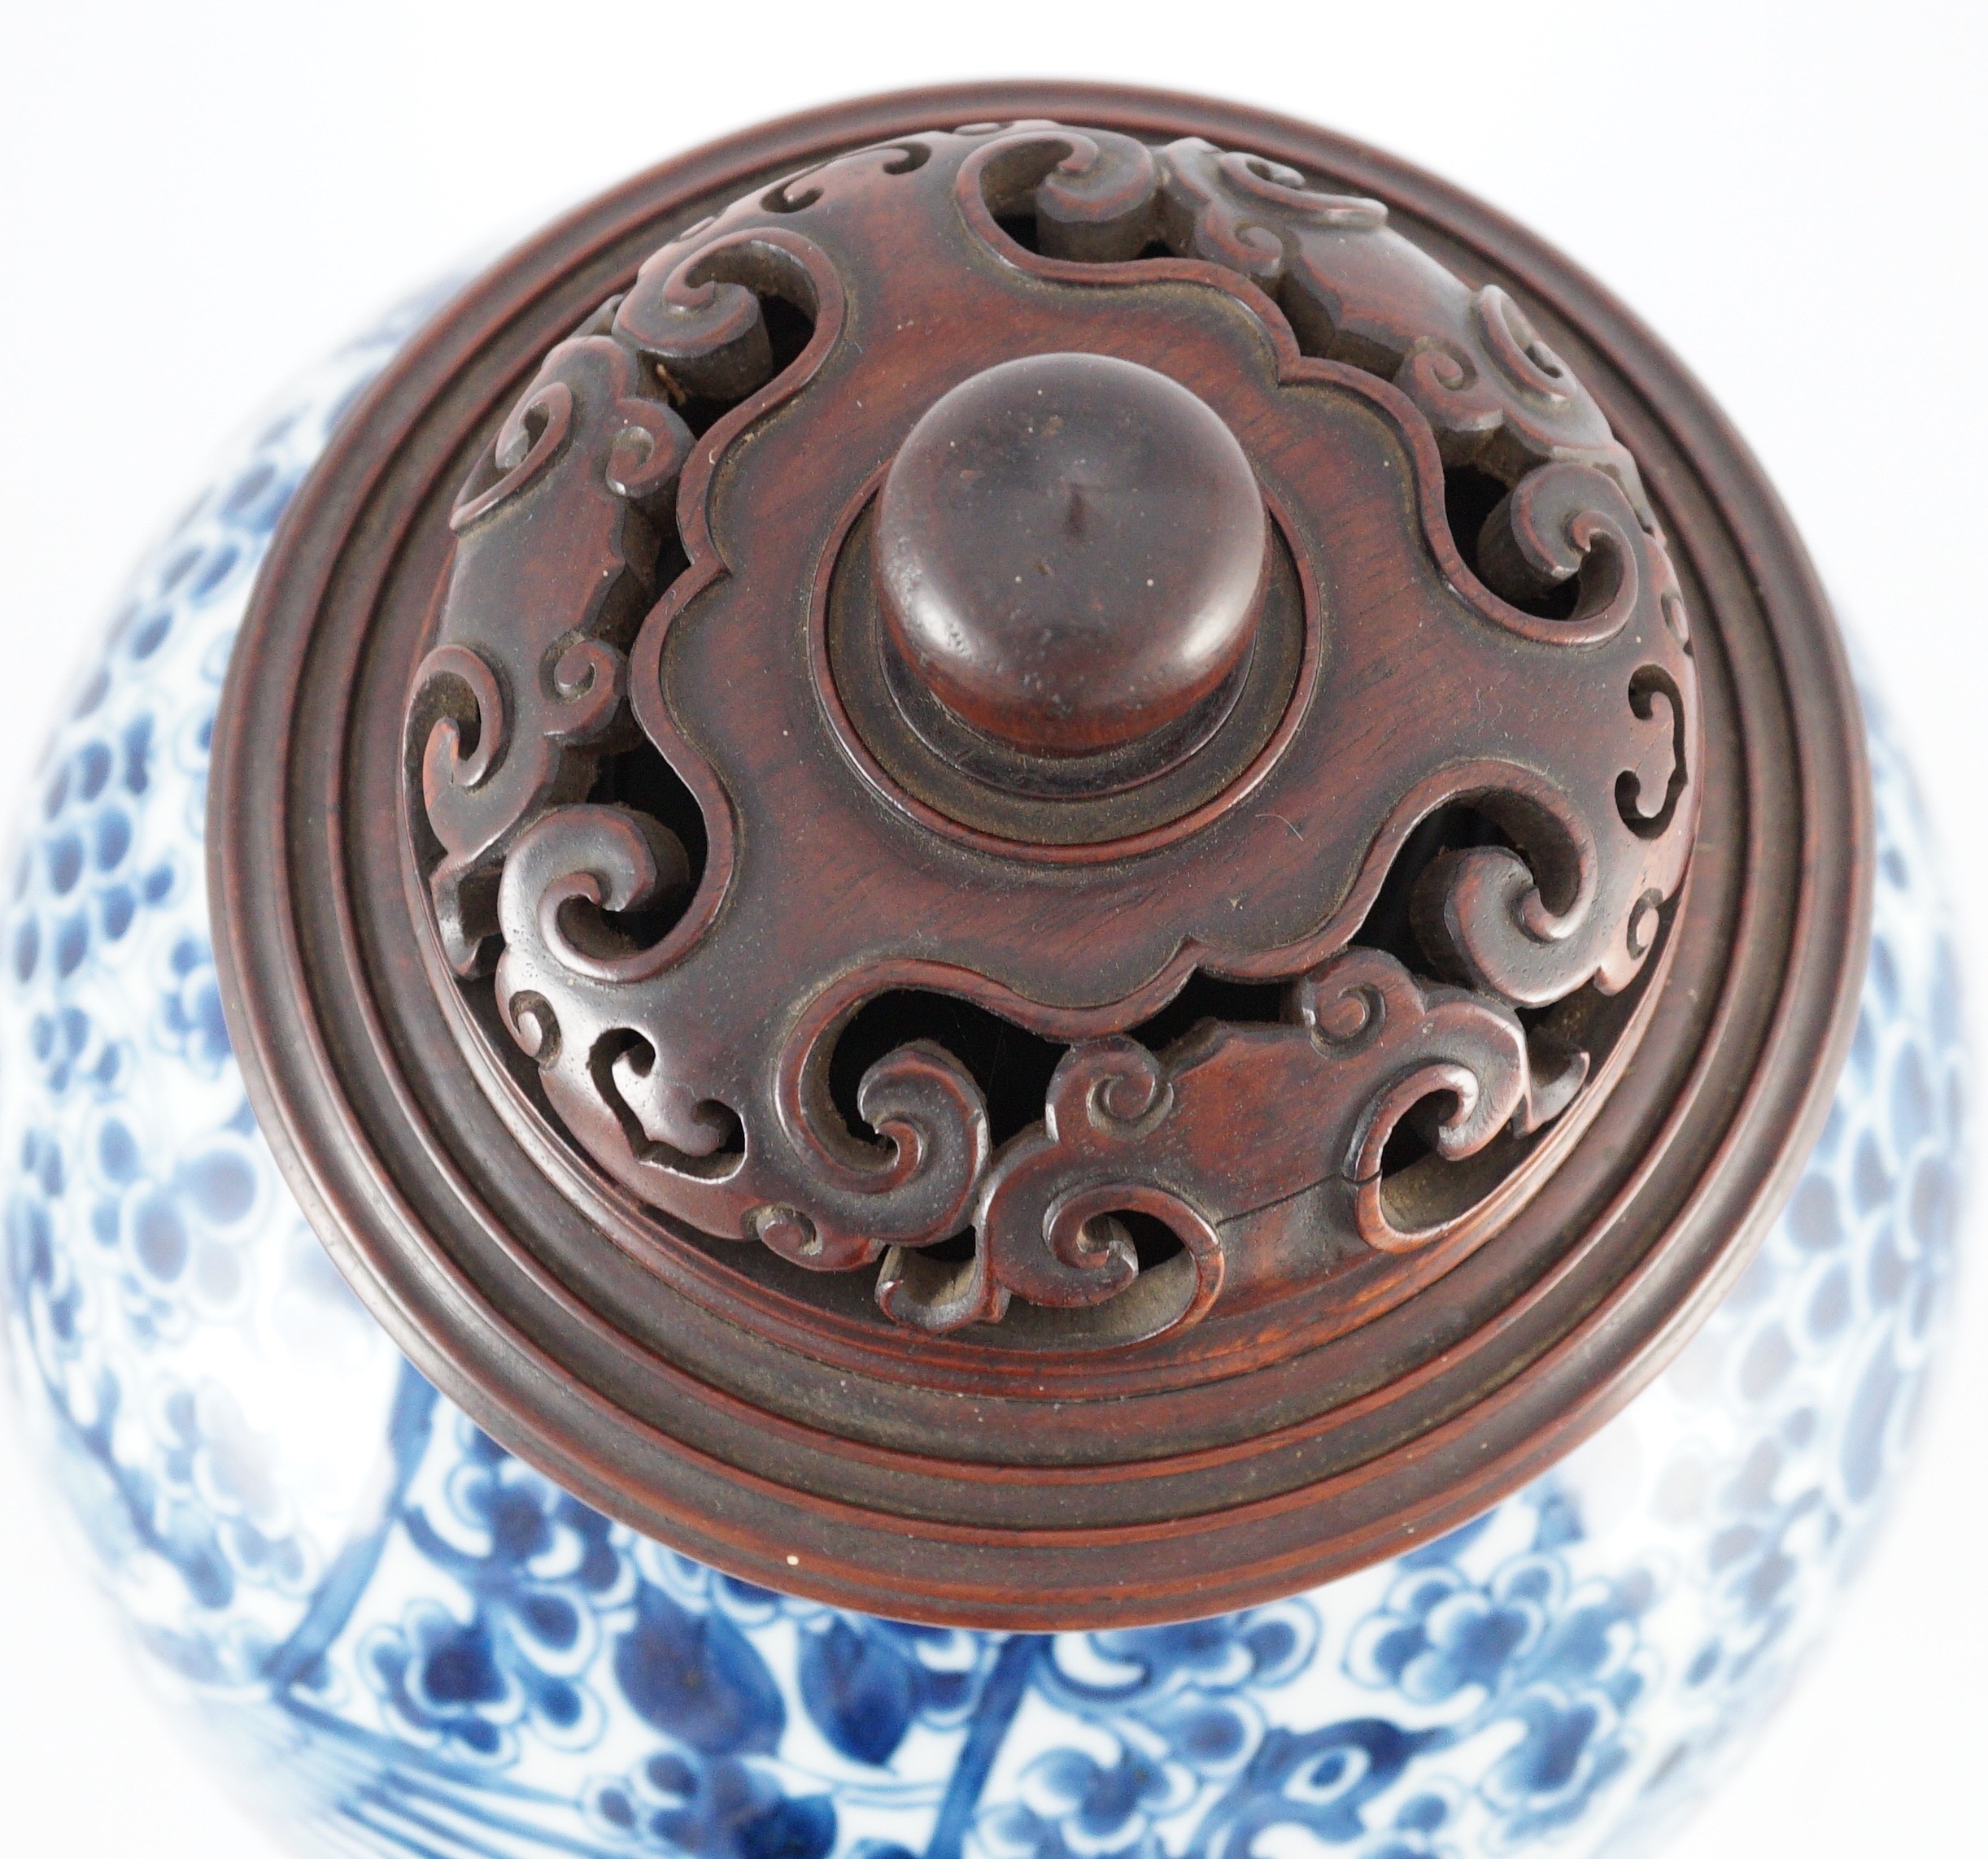 A Chinese blue and white ‘phoenix and peony’ baluster jar, Kangxi period, with a later wood cover, 36cm high excluding later wood cover